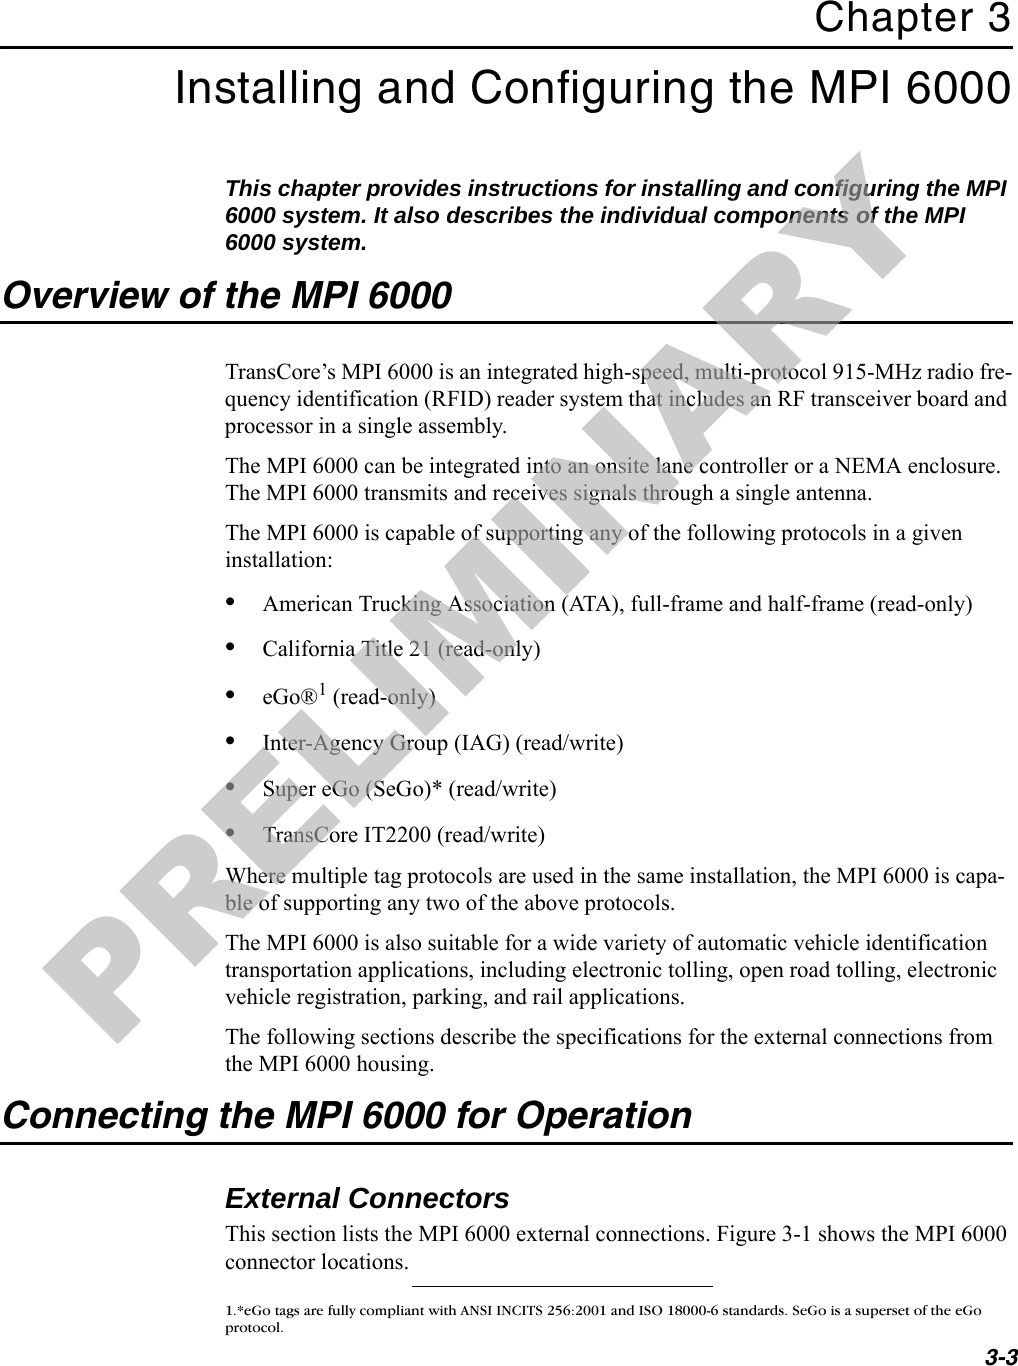 3-3Chapter 3Installing and Configuring the MPI 6000This chapter provides instructions for installing and configuring the MPI 6000 system. It also describes the individual components of the MPI 6000 system.Overview of the MPI 6000TransCore’s MPI 6000 is an integrated high-speed, multi-protocol 915-MHz radio fre-quency identification (RFID) reader system that includes an RF transceiver board and processor in a single assembly.The MPI 6000 can be integrated into an onsite lane controller or a NEMA enclosure. The MPI 6000 transmits and receives signals through a single antenna.The MPI 6000 is capable of supporting any of the following protocols in a given installation:•American Trucking Association (ATA), full-frame and half-frame (read-only)•California Title 21 (read-only)•eGo®1 (read-only)•Inter-Agency Group (IAG) (read/write)•Super eGo (SeGo)* (read/write)•TransCore IT2200 (read/write)Where multiple tag protocols are used in the same installation, the MPI 6000 is capa-ble of supporting any two of the above protocols.The MPI 6000 is also suitable for a wide variety of automatic vehicle identification transportation applications, including electronic tolling, open road tolling, electronic vehicle registration, parking, and rail applications.The following sections describe the specifications for the external connections from the MPI 6000 housing.Connecting the MPI 6000 for OperationExternal ConnectorsThis section lists the MPI 6000 external connections. Figure 3-1 shows the MPI 6000 connector locations.1.*eGo tags are fully compliant with ANSI INCITS 256:2001 and ISO 18000-6 standards. SeGo is a superset of the eGo protocol.PRELIMINARY